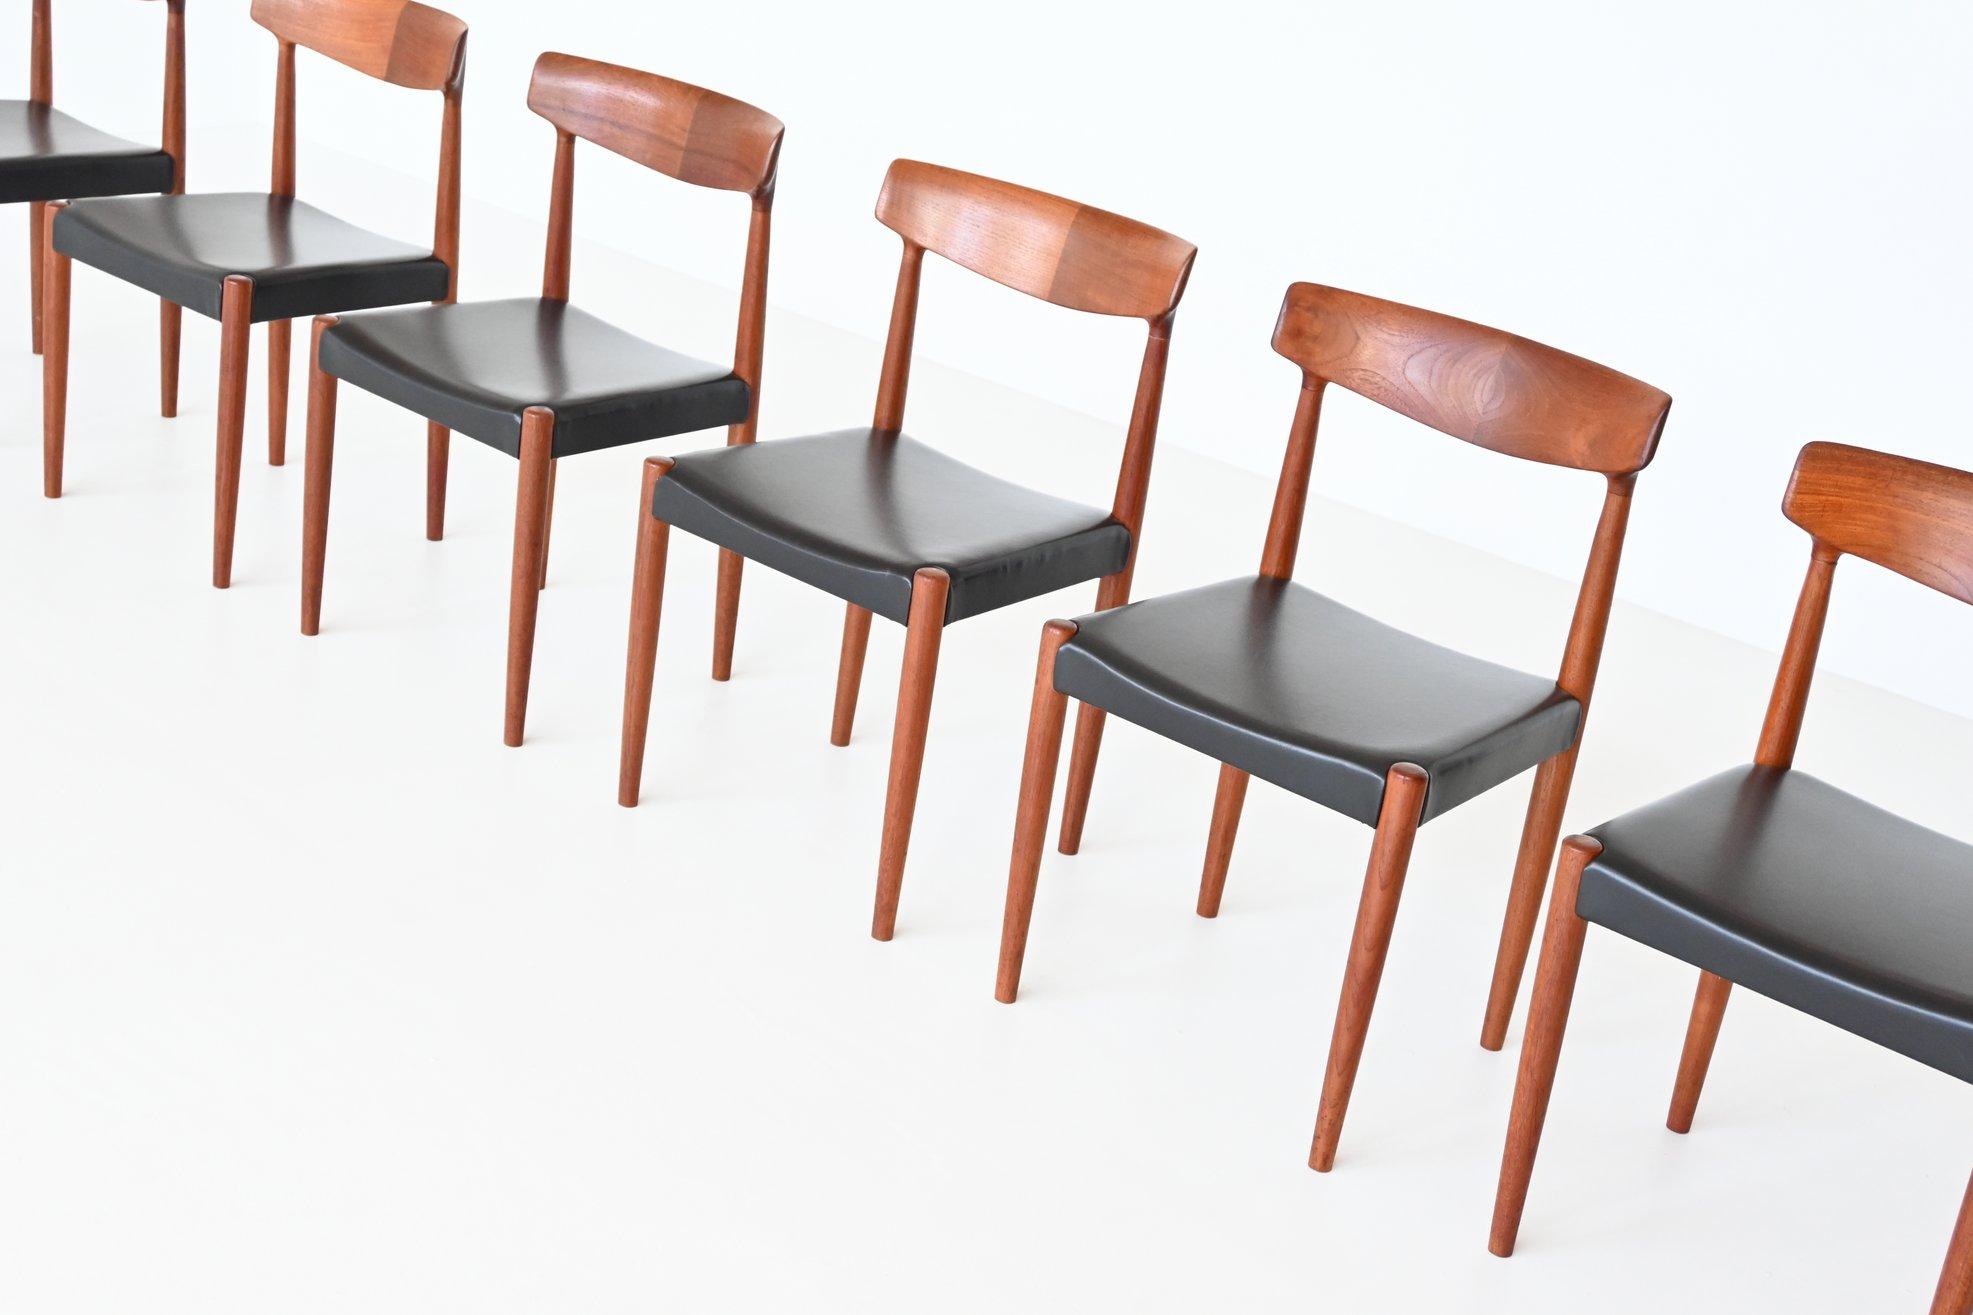 Beautiful shaped and well-crafted set of six dining chairs model 343 designed by Knud Faerch and manufactured by Bovenkamp, Denmark 1960. The frames are made of beautiful grained solid teak wood with hand carved sculptural back rests. The seats are